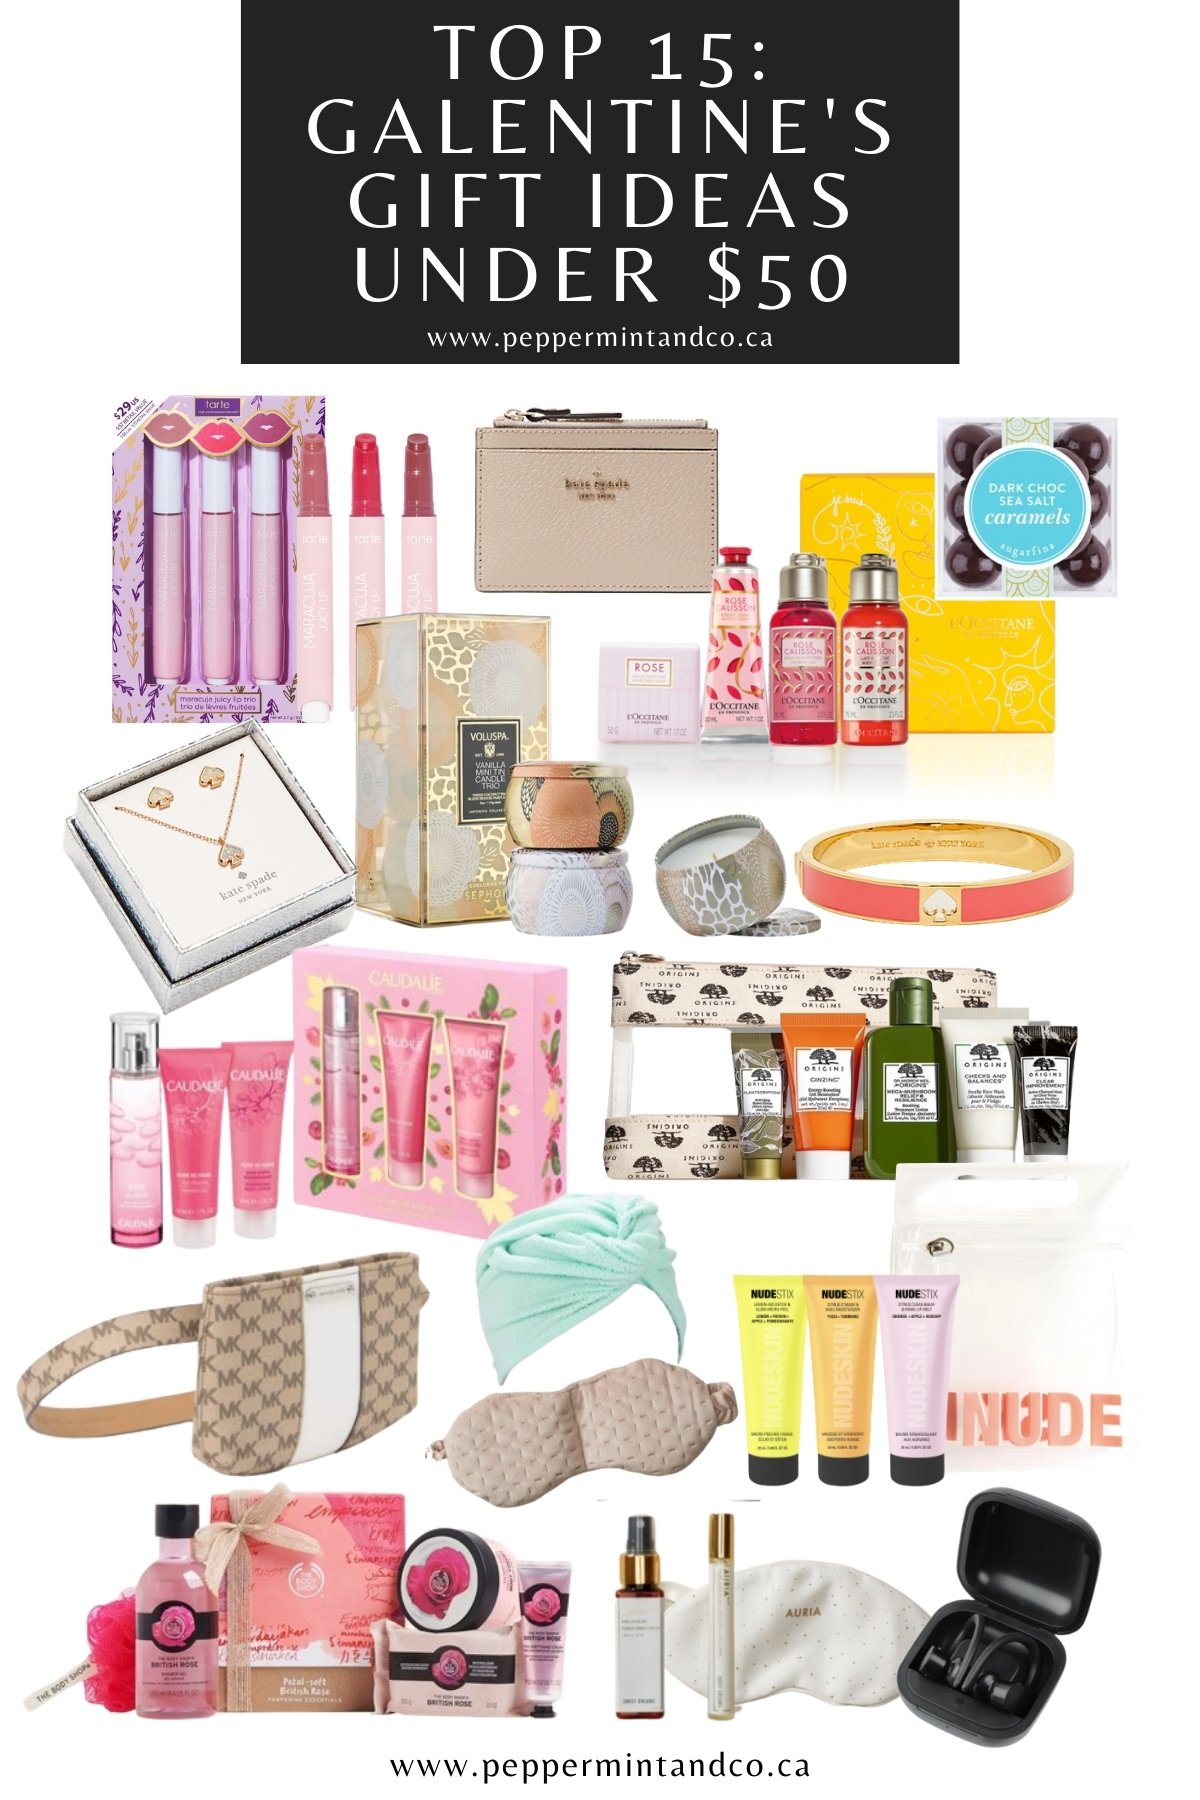 Galentine's Gift Guide, Top 15 under $50